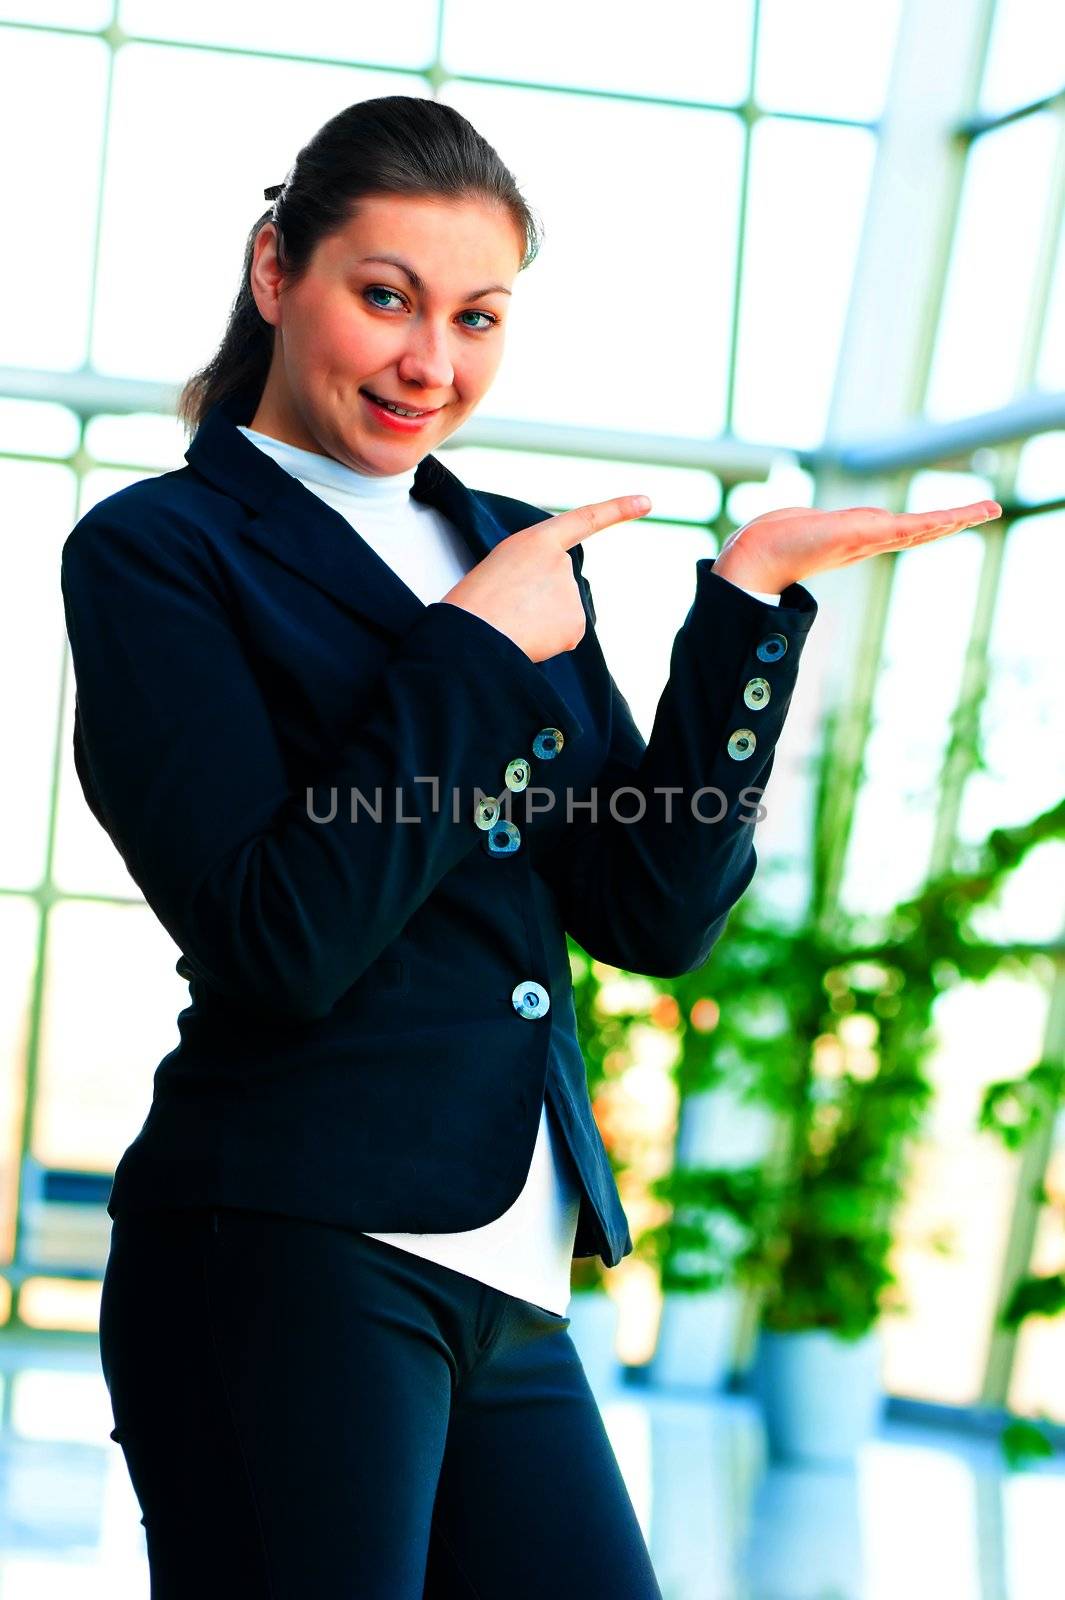 Girl in a business suit holding something on the palm and finger pointing to it